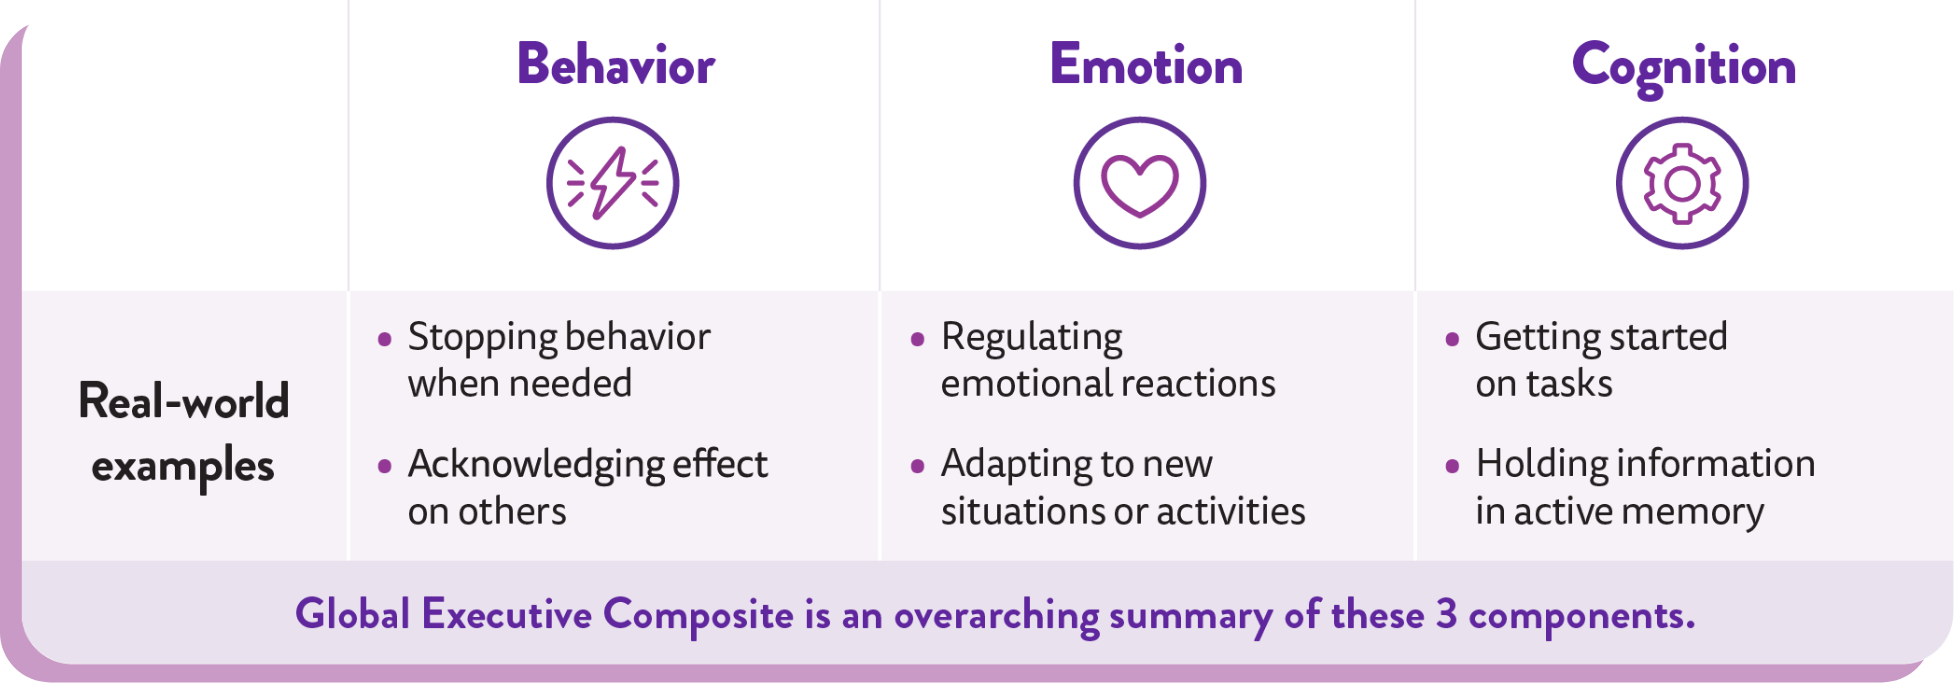 A figure showing how BRIEF® was used as a safety endpoint in Dravet syndrome studies with FINTEPLA®. BRIEF® evaluates behavior, emotion, and cognition.